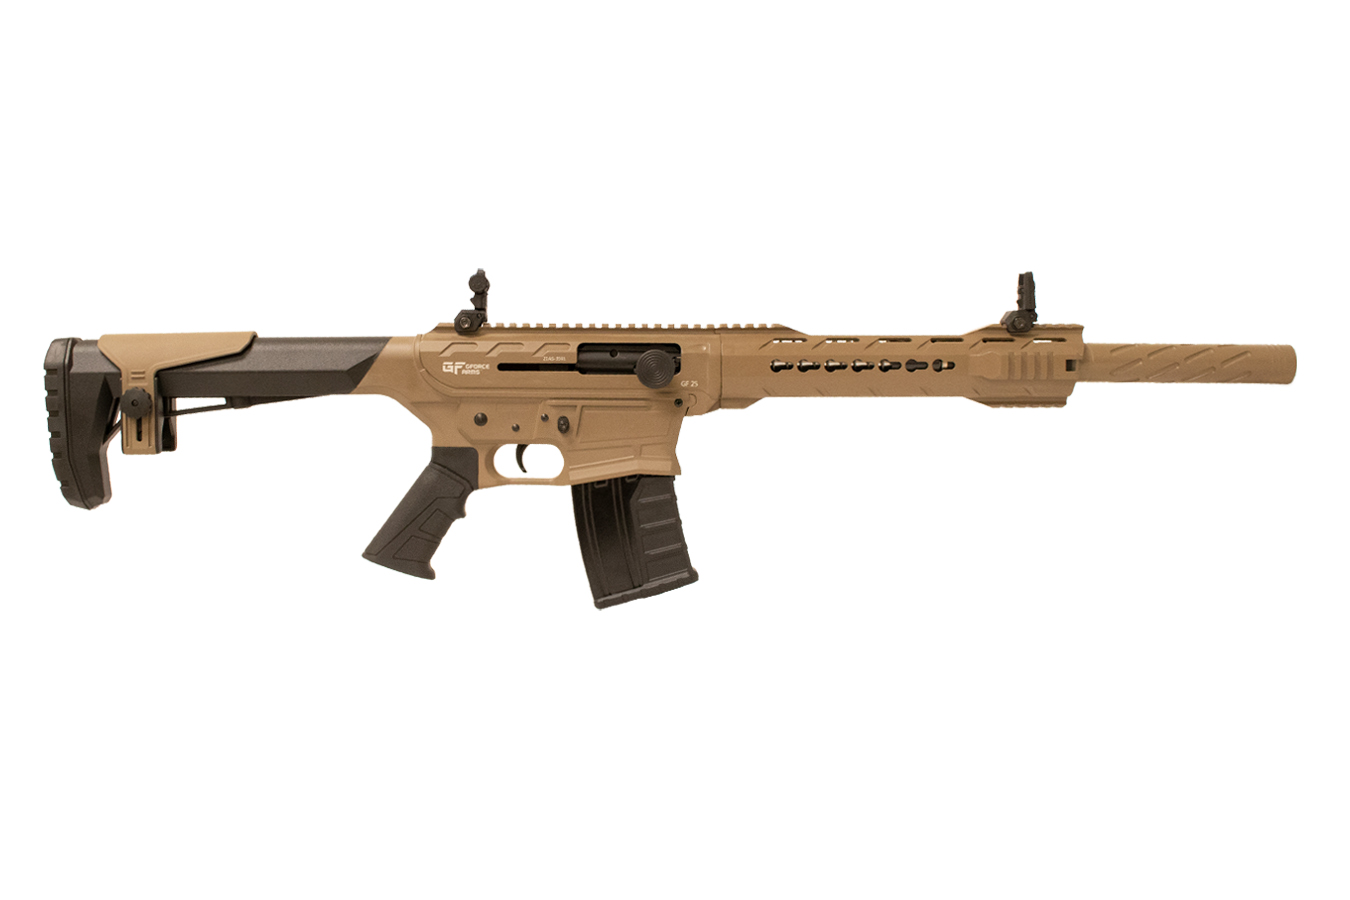 No. 13 Best Selling: GFORCE ARMS AR12 SHOTGUN FDE FINISH 20 IN BBL